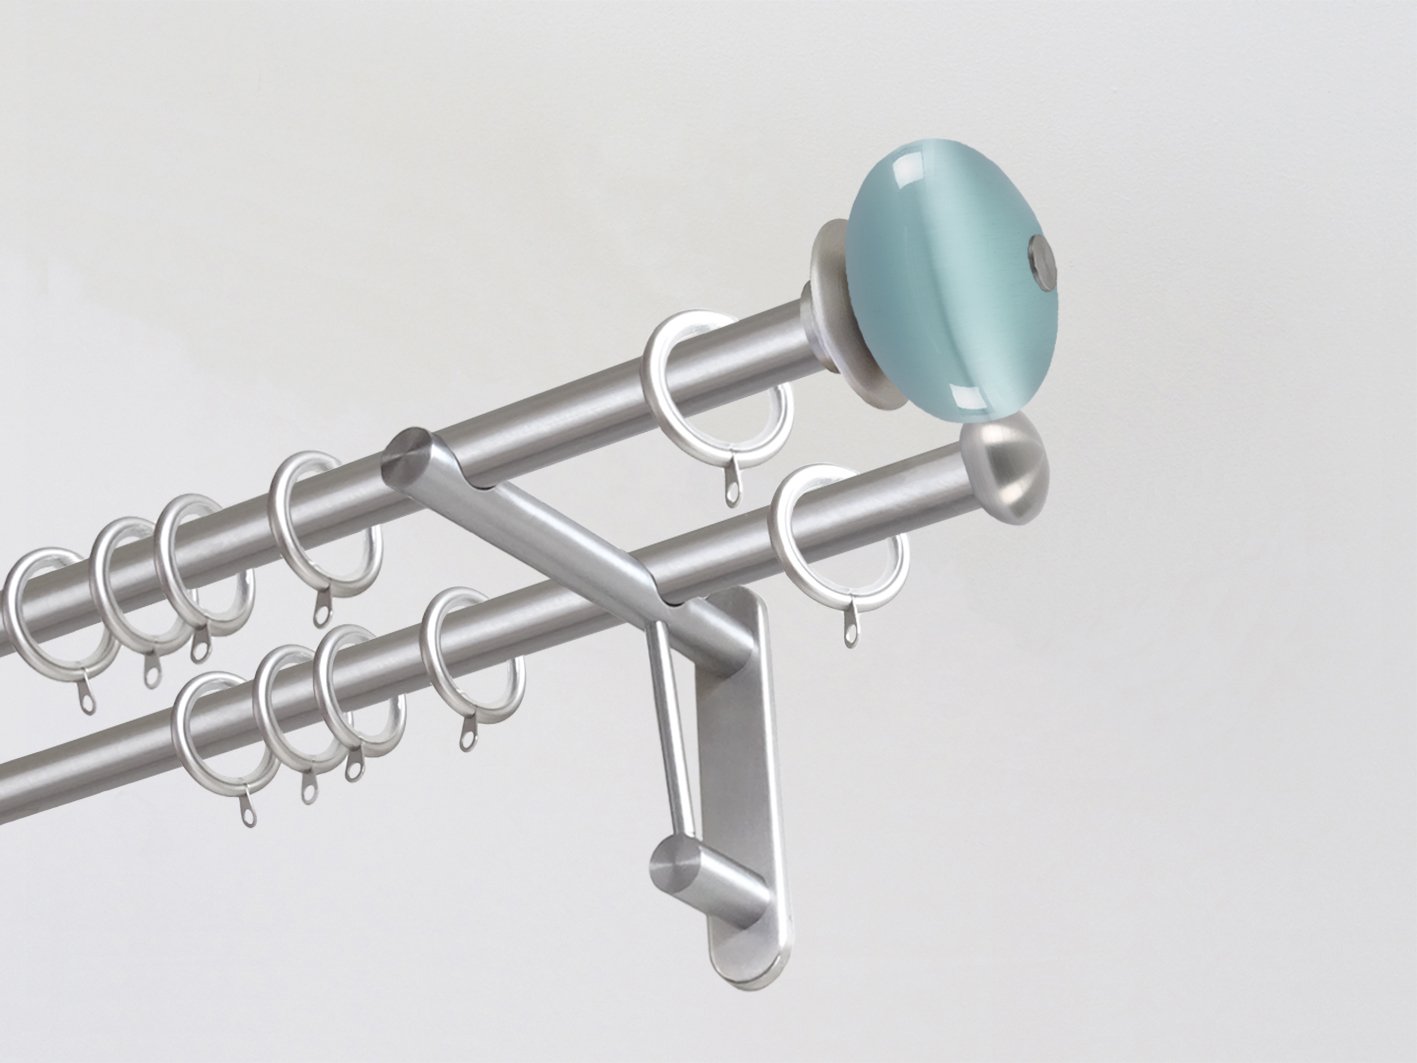 Double 19mm stainless steel curtain pole duo system set with glass moonstone finials in pale aqua